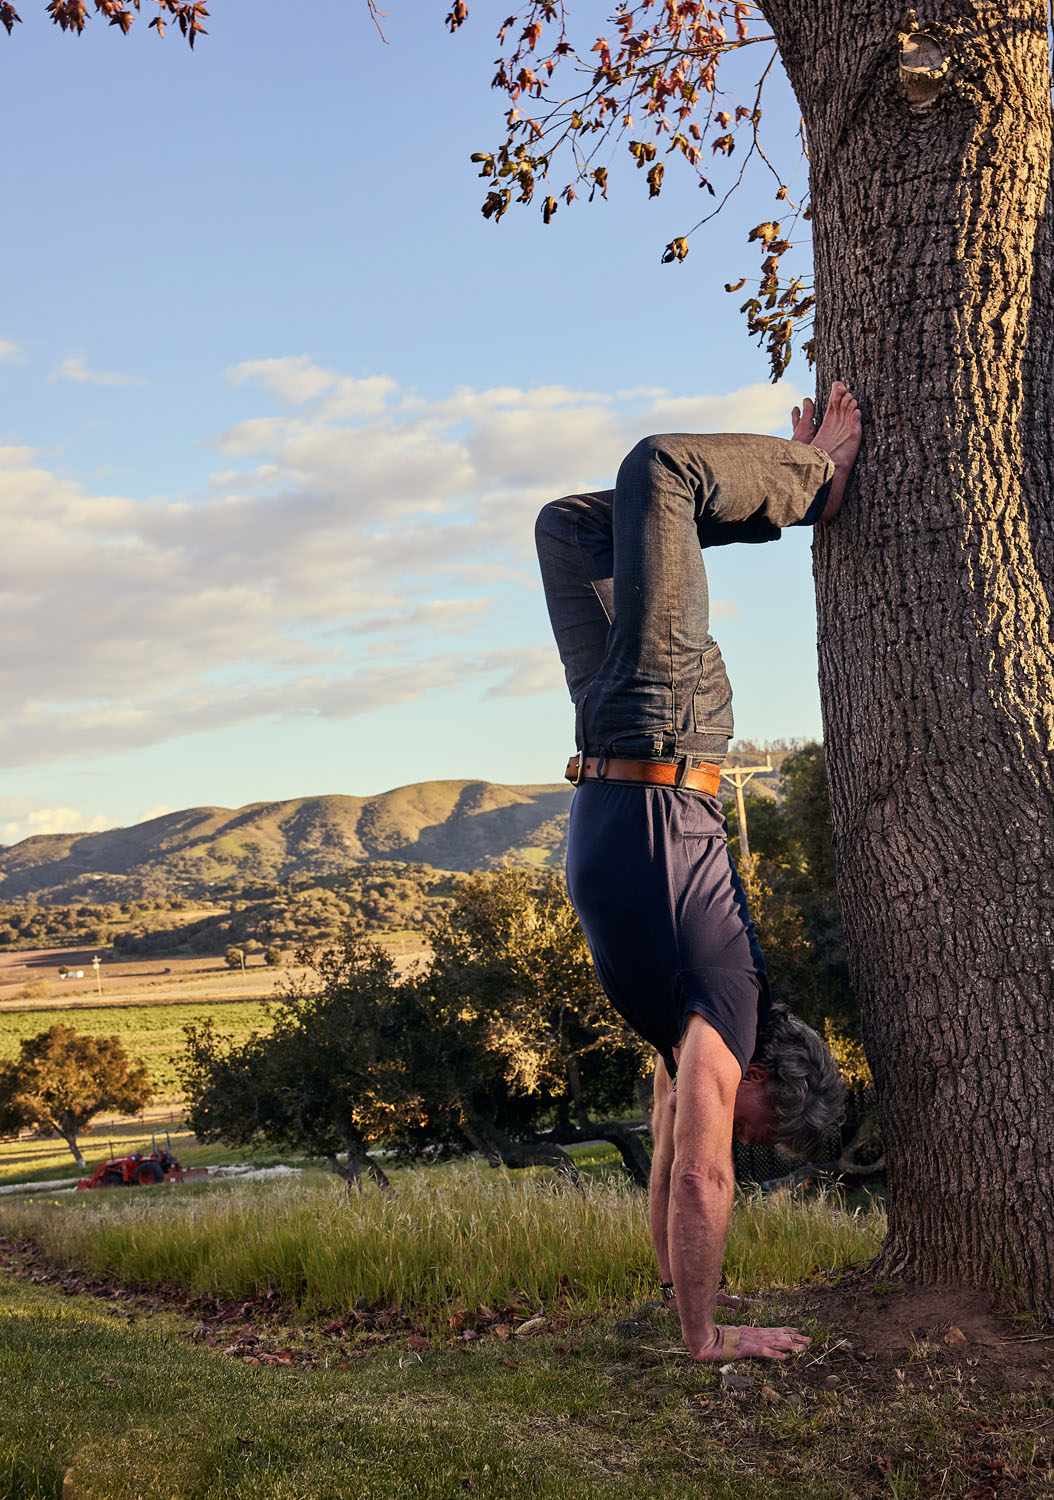 Handstand with Tree Assist